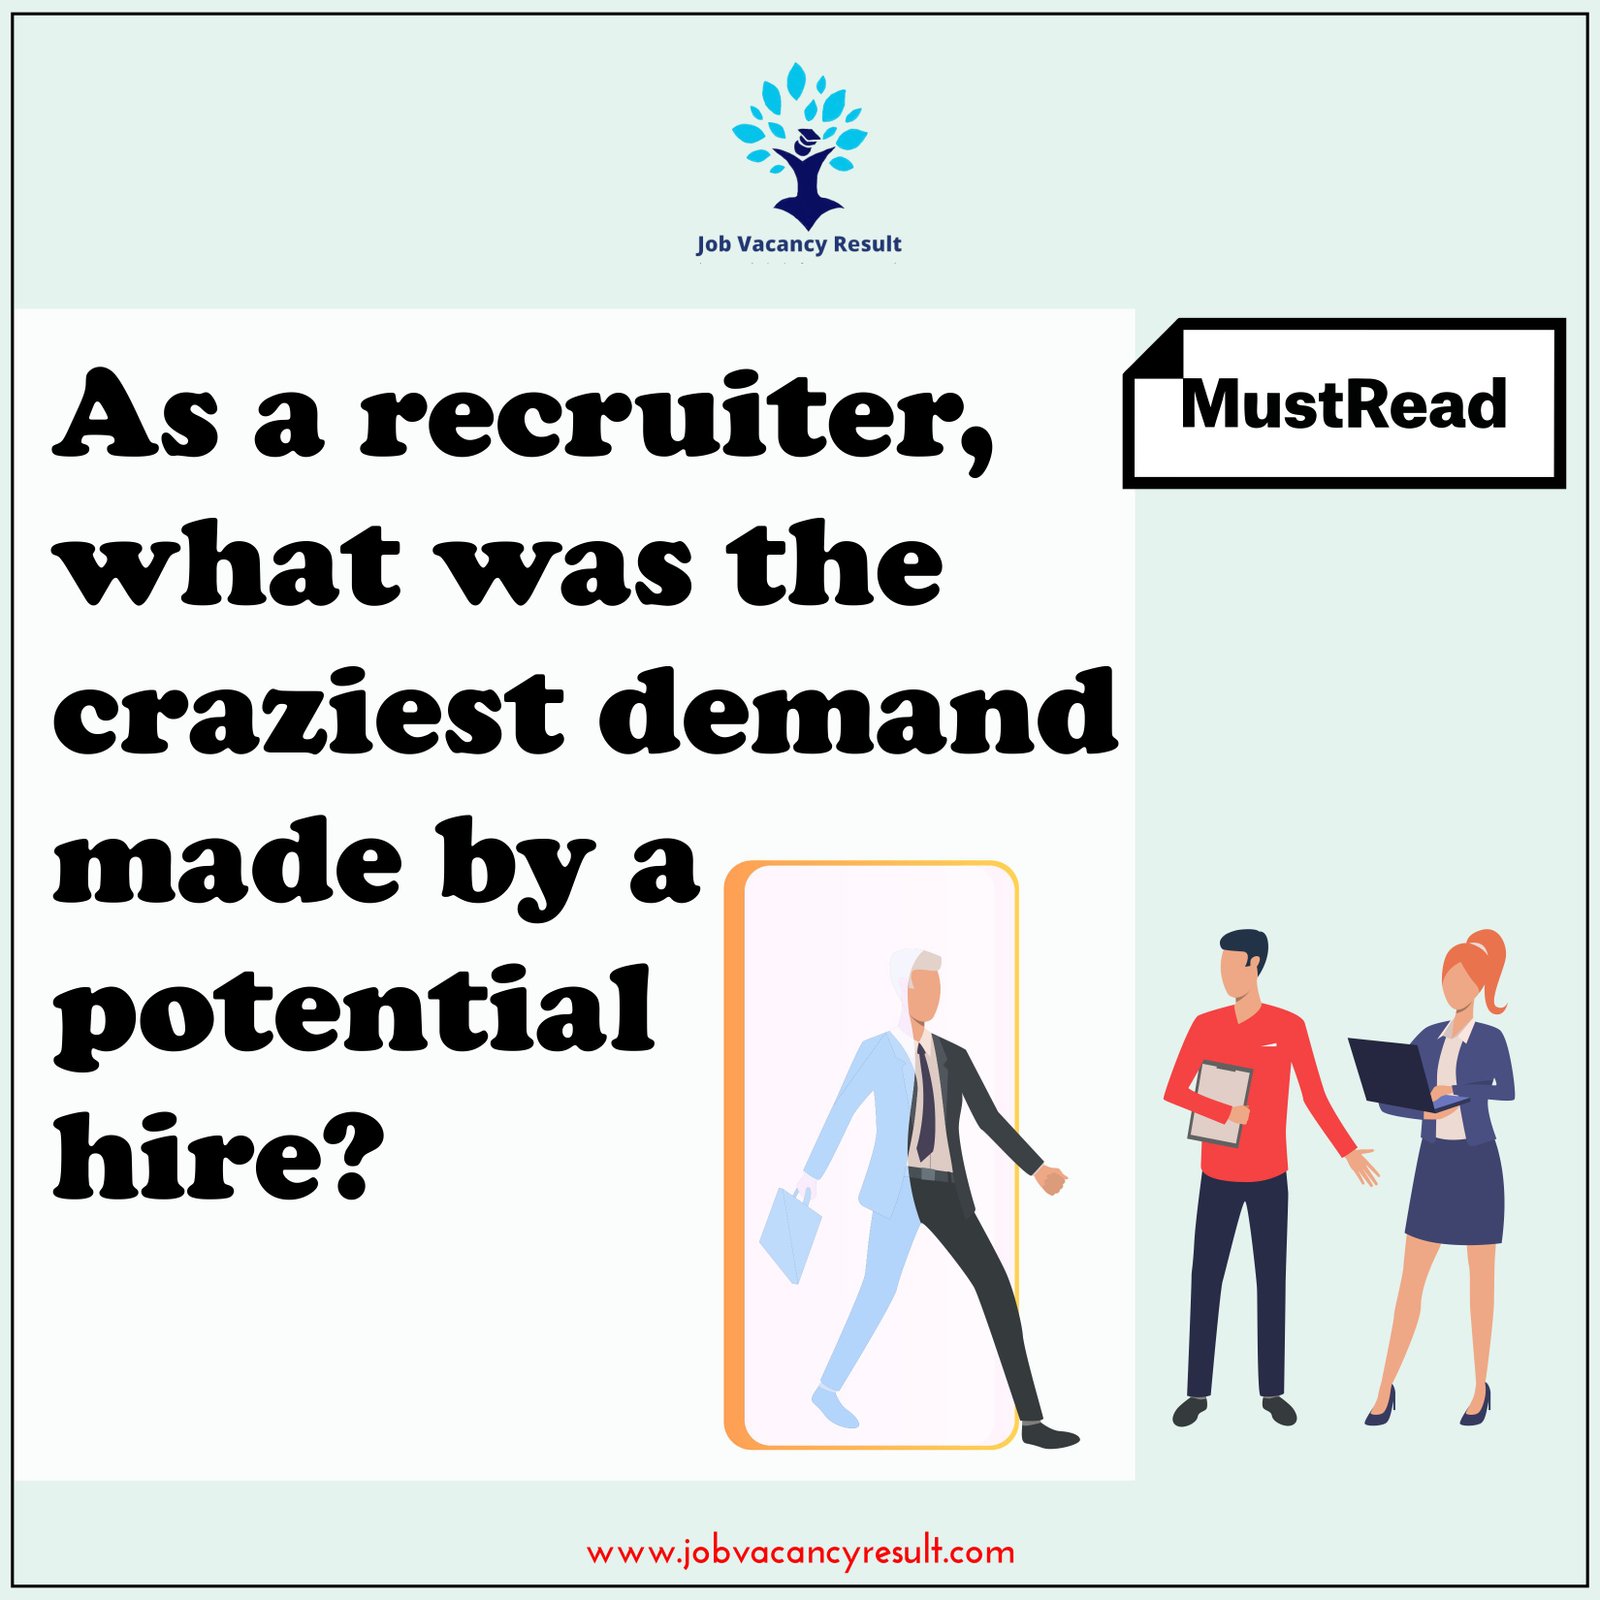 As a recruiter, what was the craziest demand made by a potential hire?